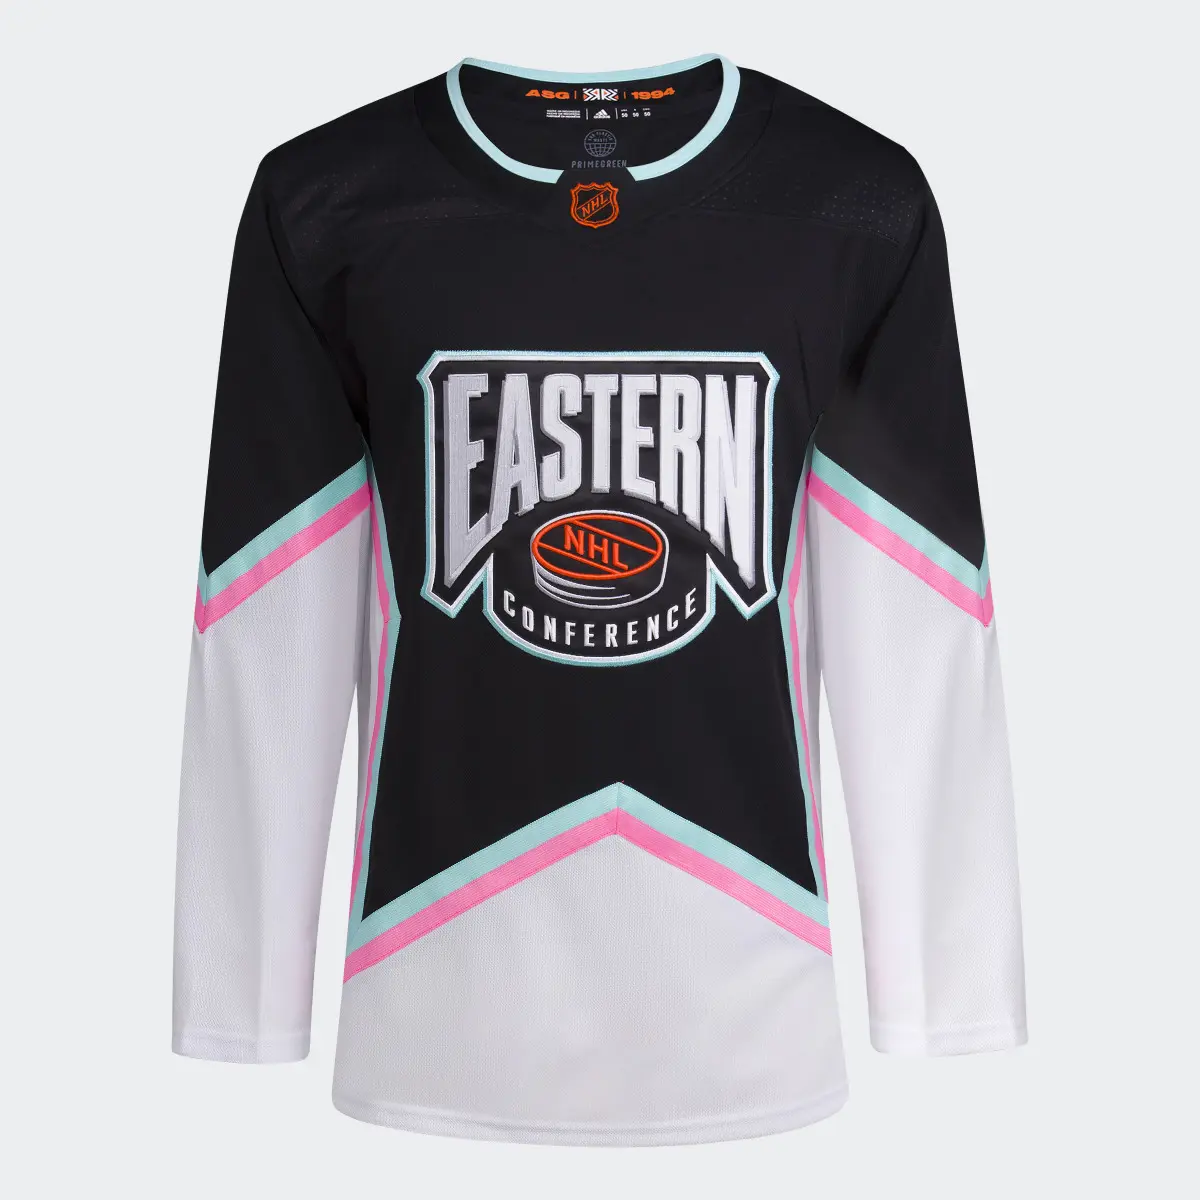 Adidas Eastern Conference All-Star Jersey. 1